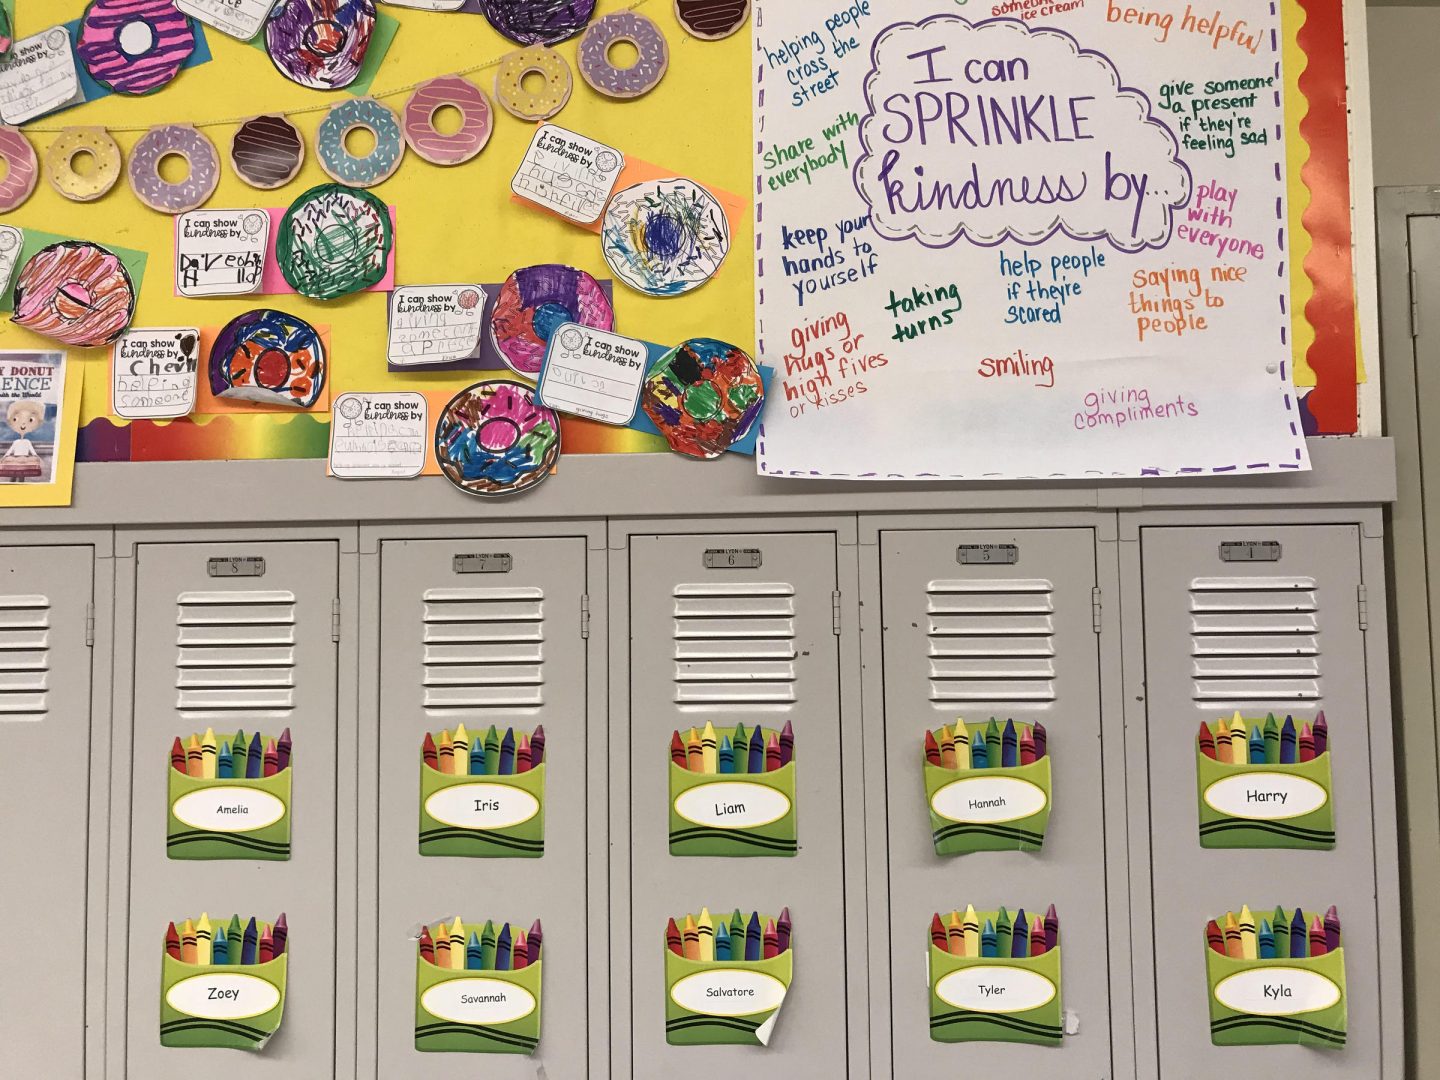 School lockers and art are shown.